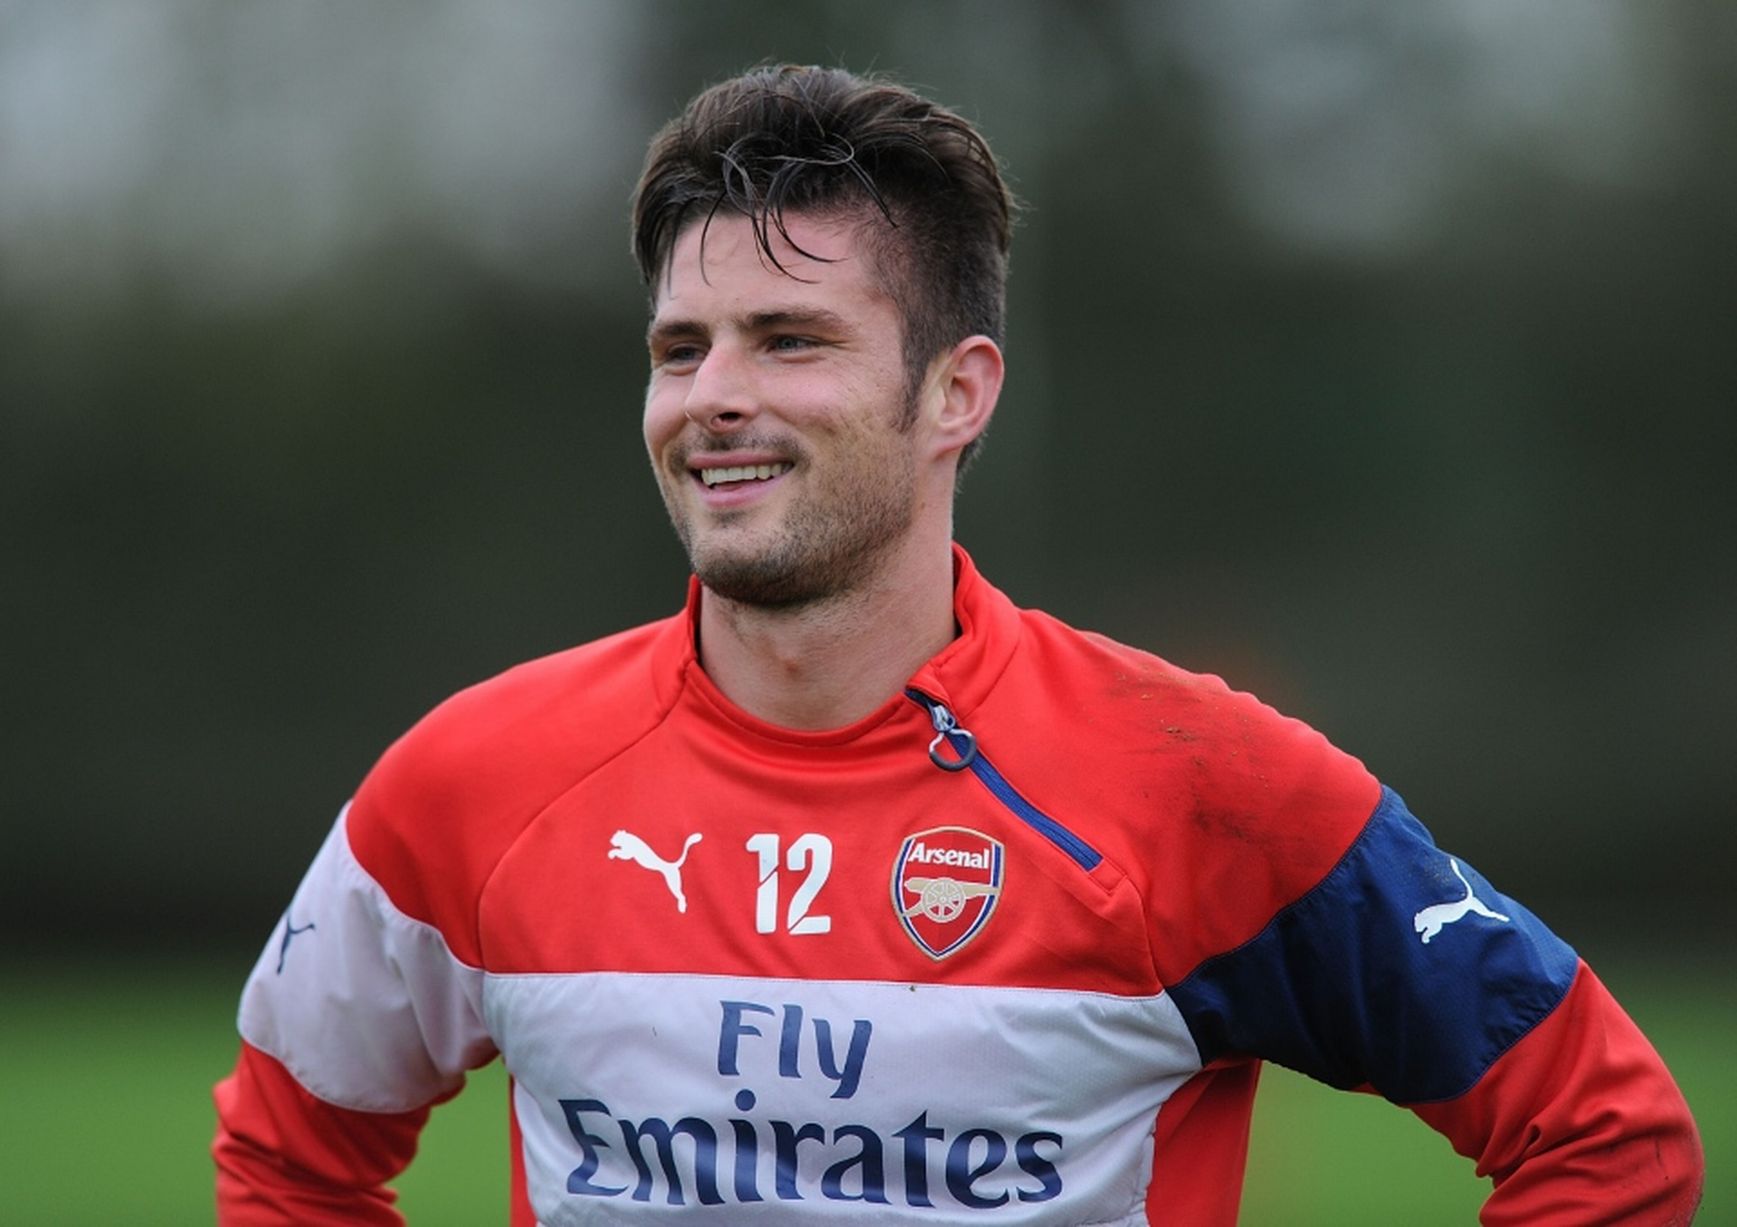 Arsenal FC Forward Olivier Giroud Nominated for an ESPY